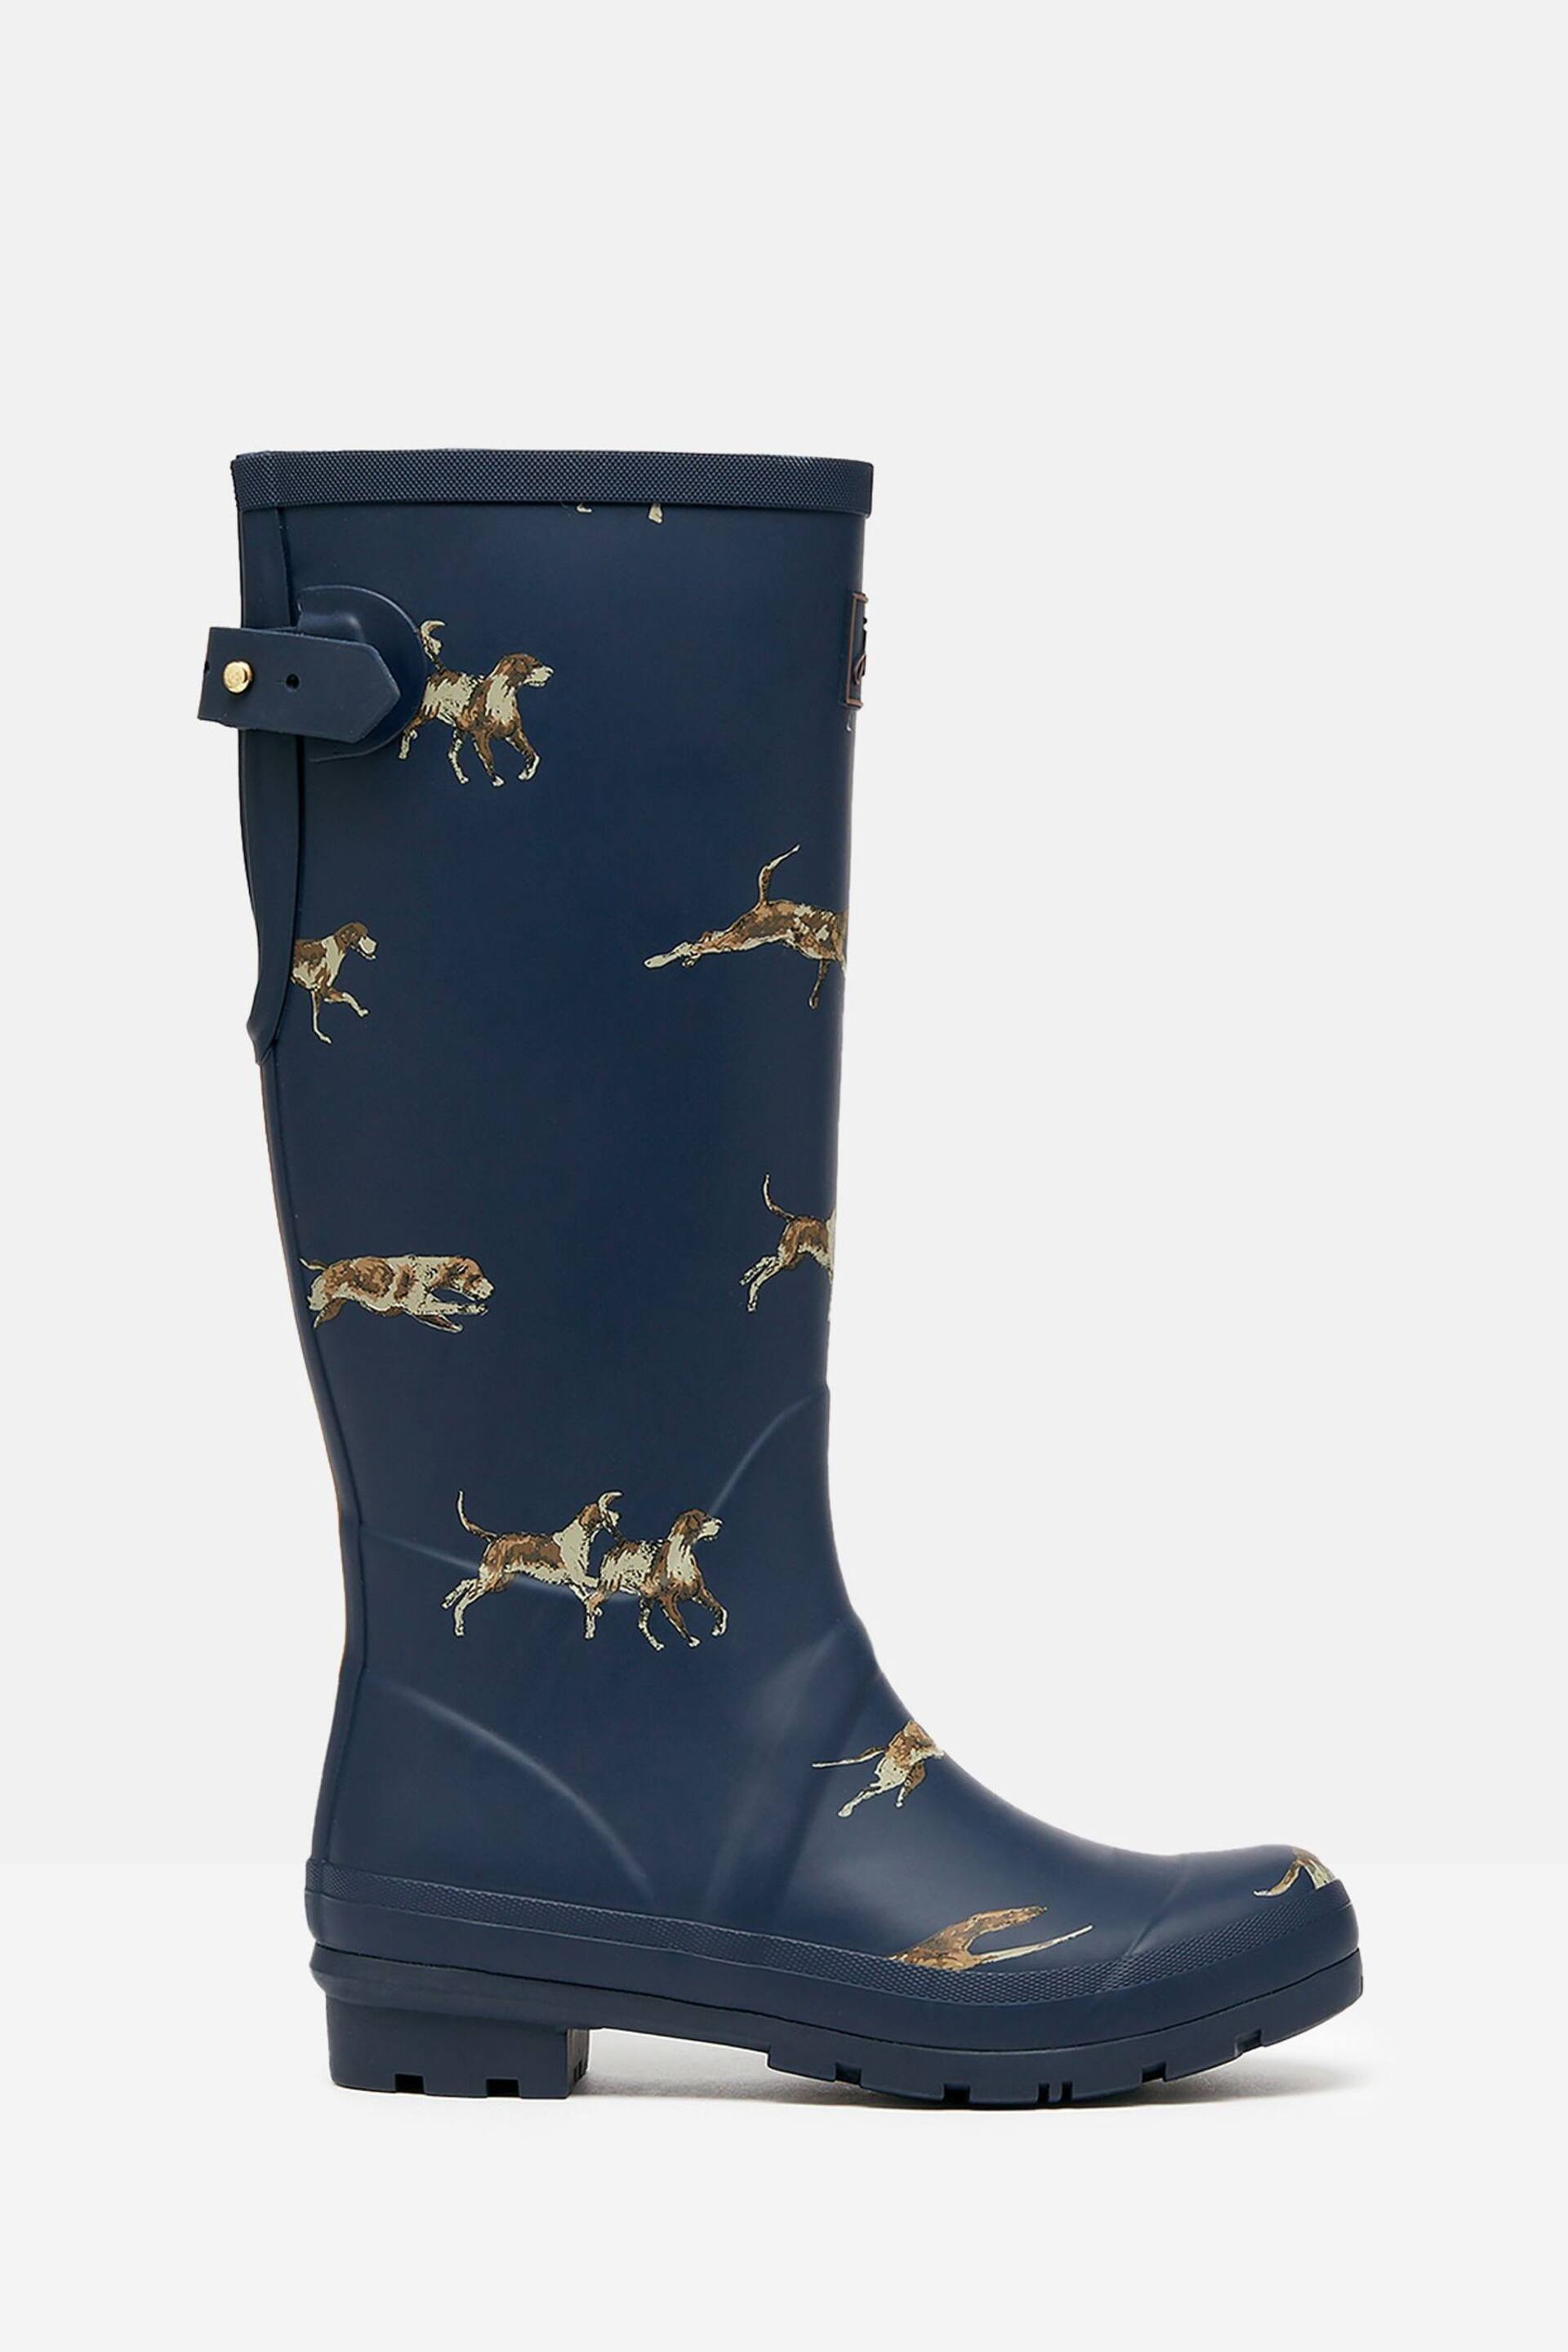 Joules Navy Blue Dog Print Adjustable Tall Wellies - Image 3 of 6